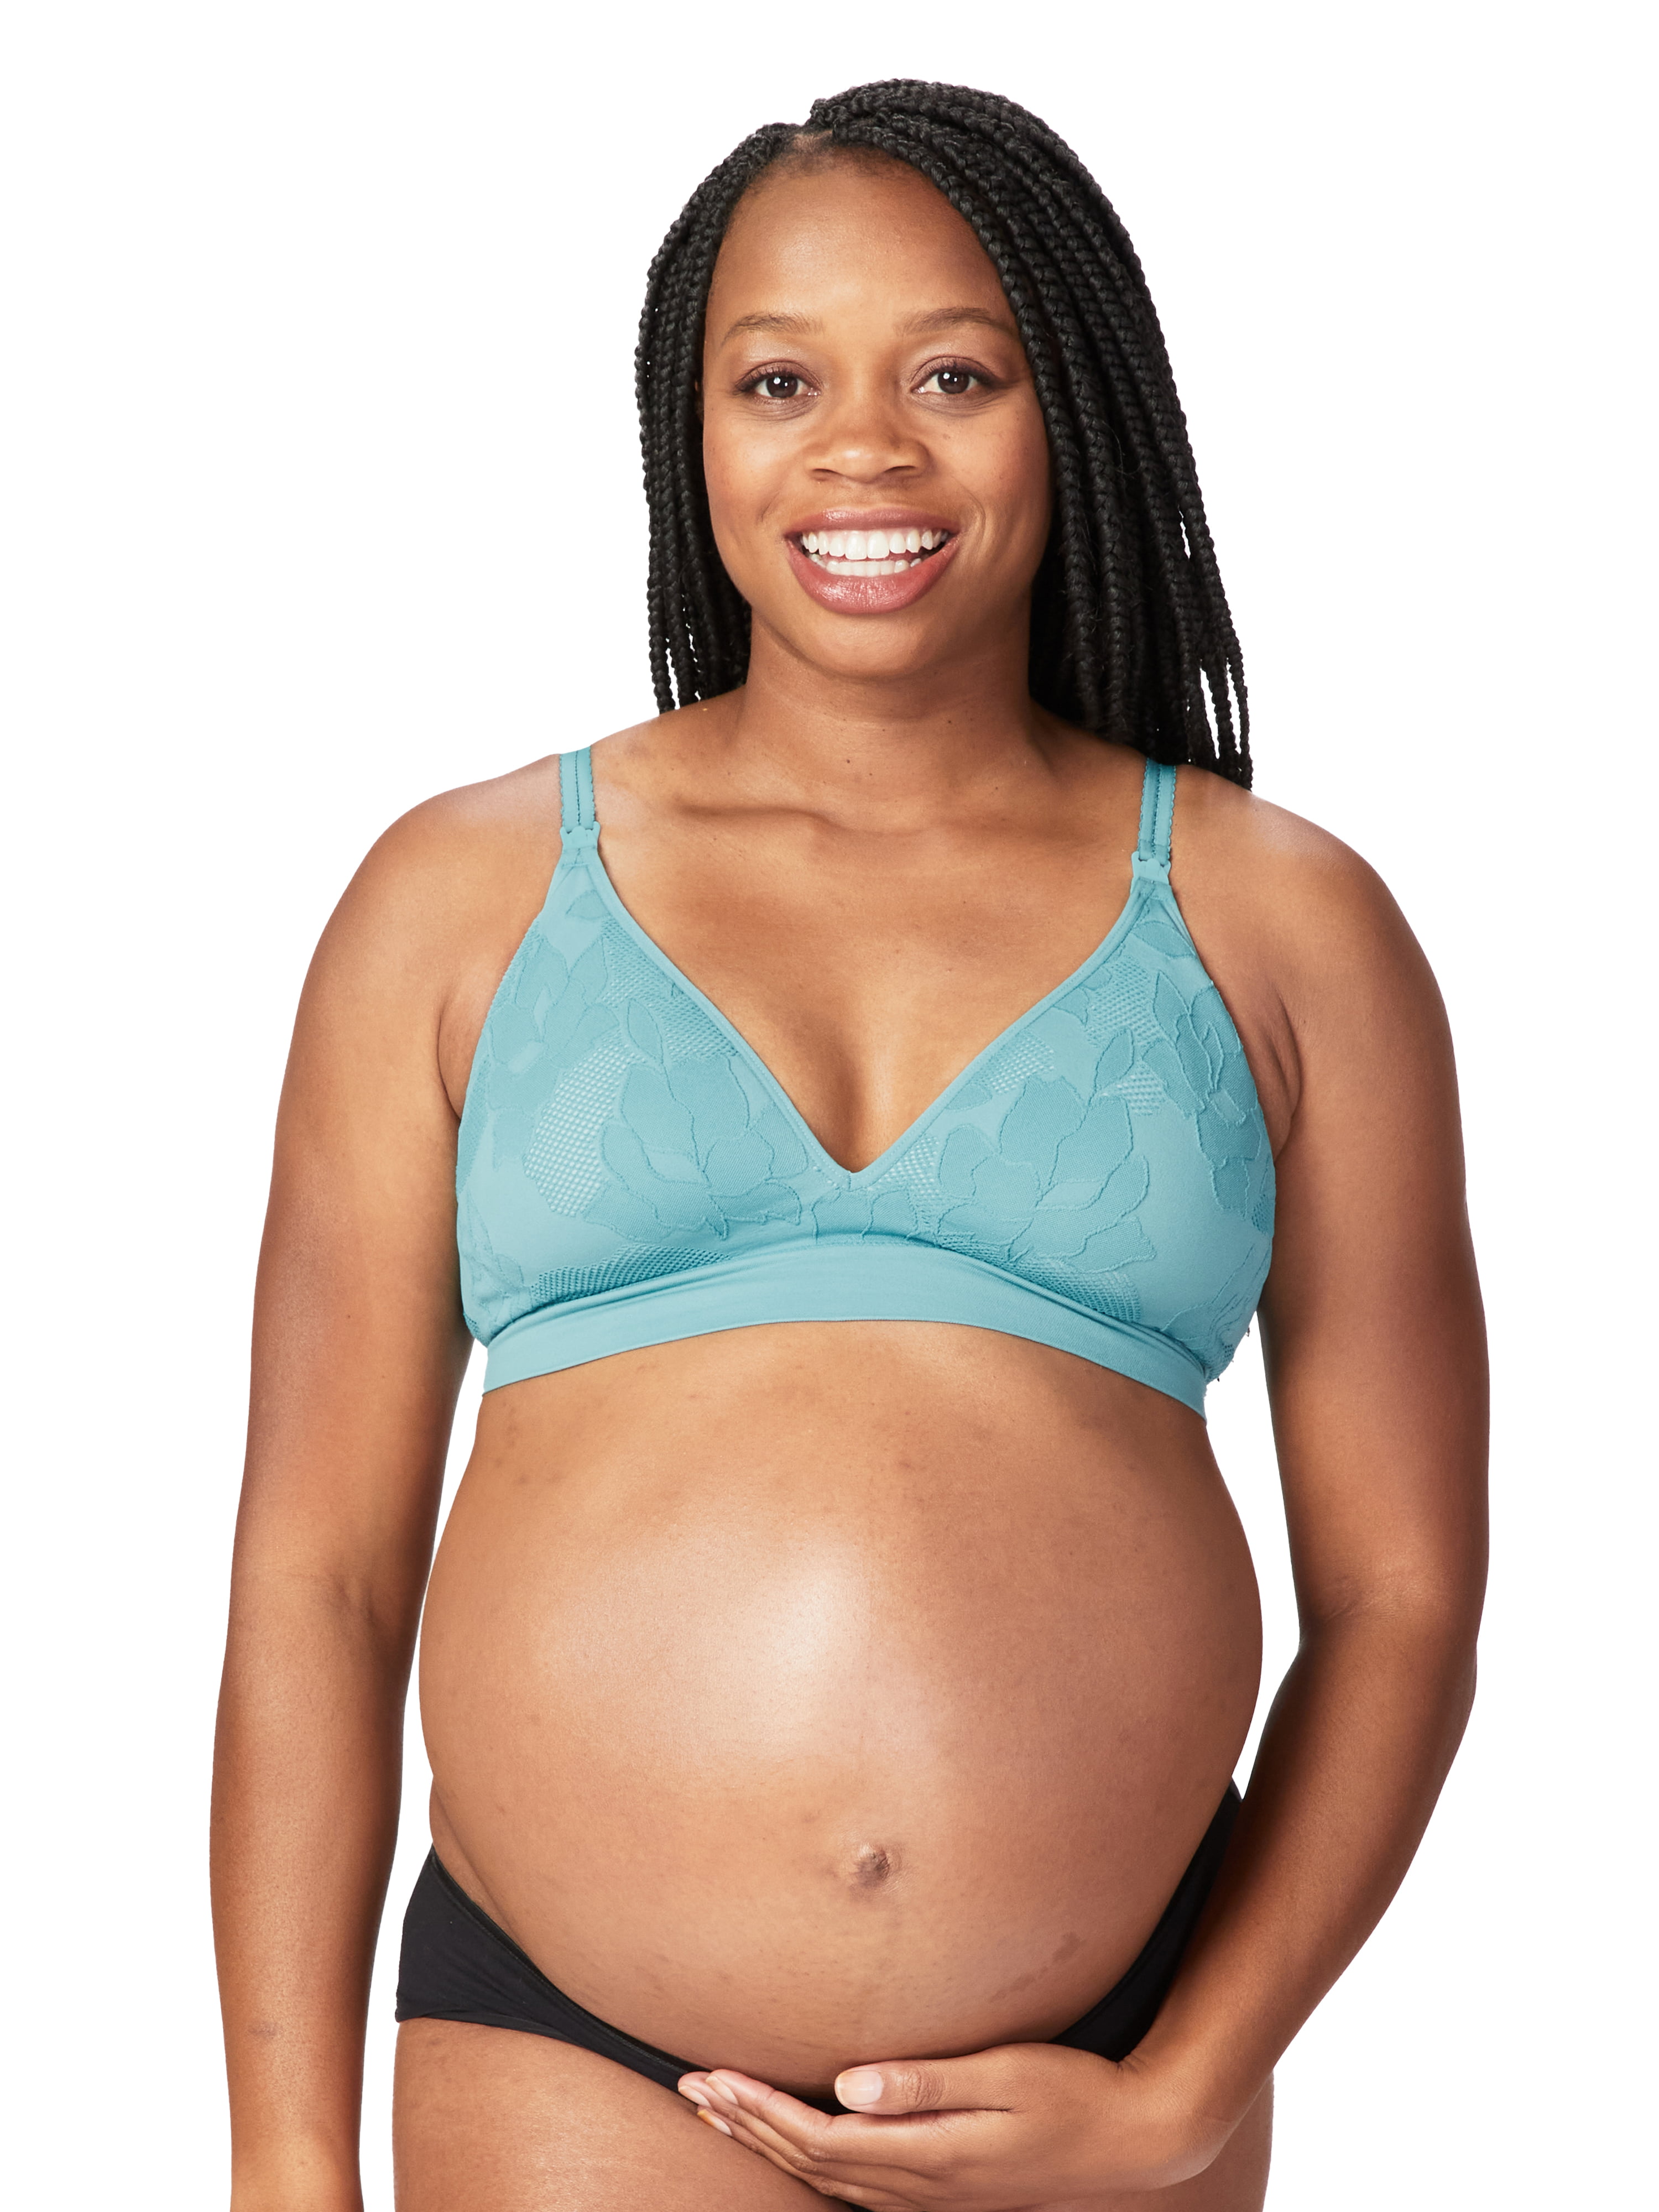 Cake Maternity Freckles Recycled Wire Free Nursing Bra for Breastfeeding,  Wireless Maternity Bra (for F-H Cups), Teal, Medium 